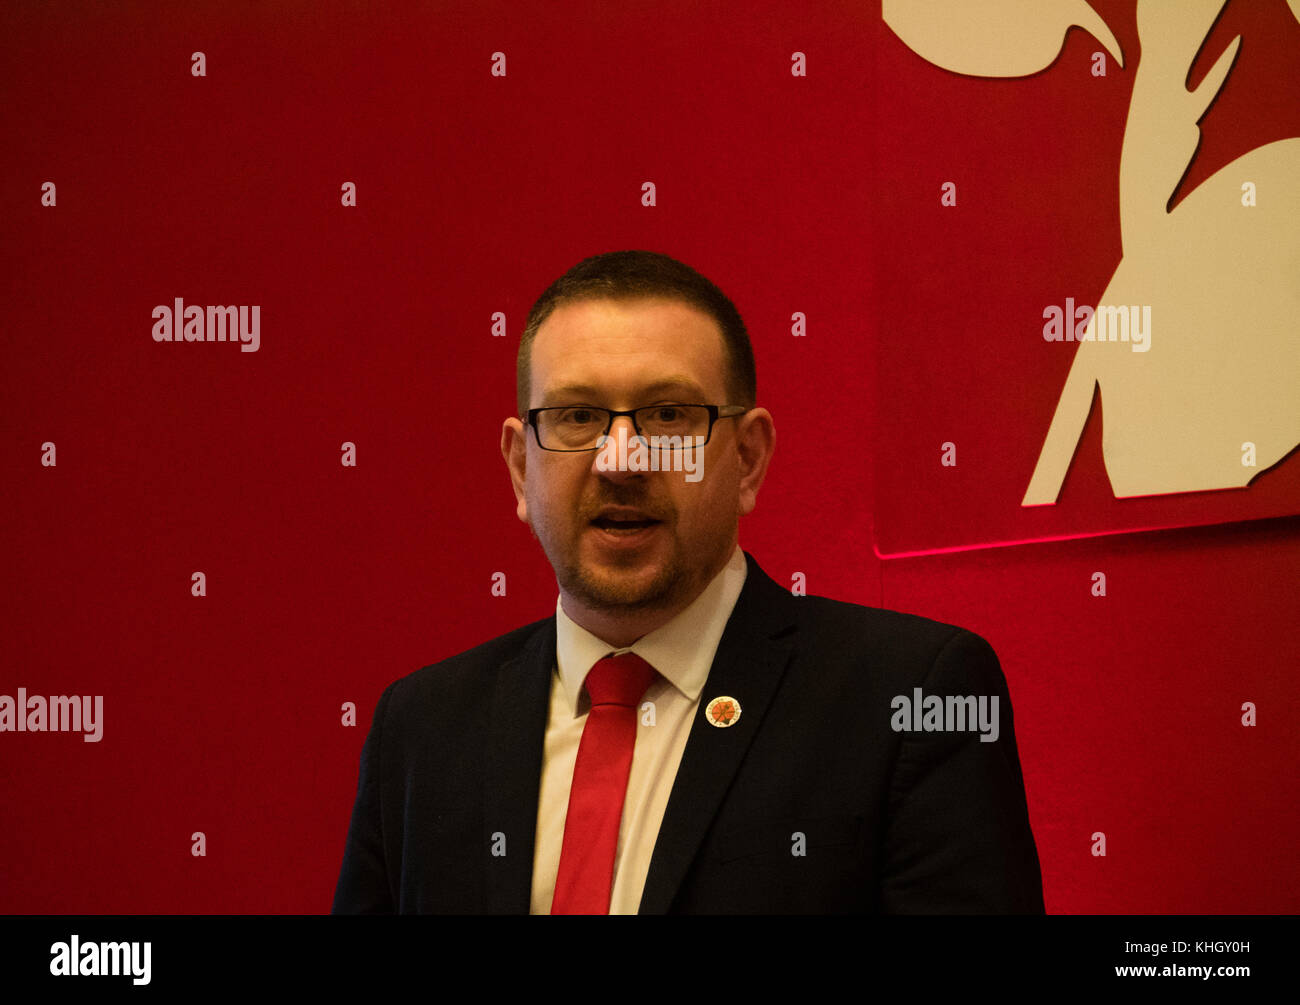 Huntingdon, UK. 18th November, 2017. Andrew Gwynne MP the British Labour party's shadow secretary of state for communities and local government Credit: William Edwards/Alamy Live News Stock Photo